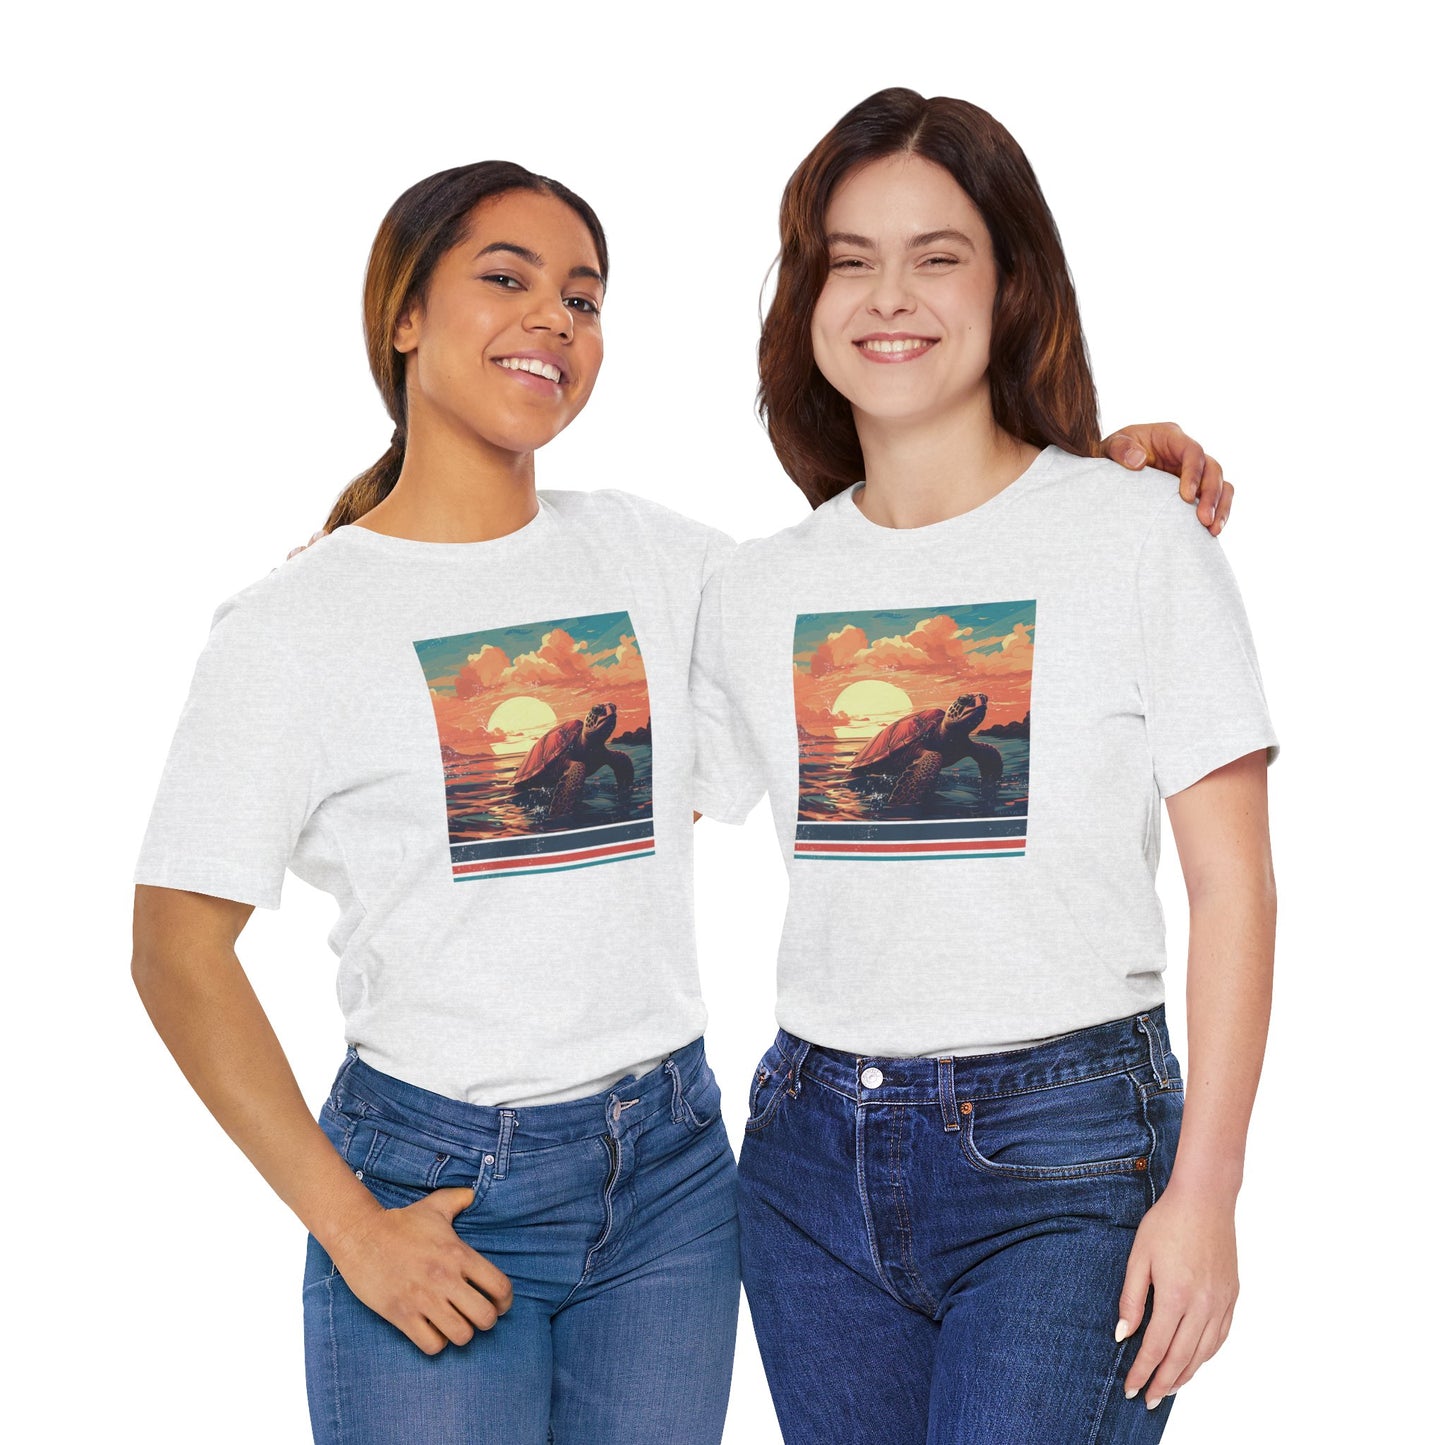 Sunset Turtle Graphic Tee - Unisex Eco-Friendly Cotton Shirt by JD Cove